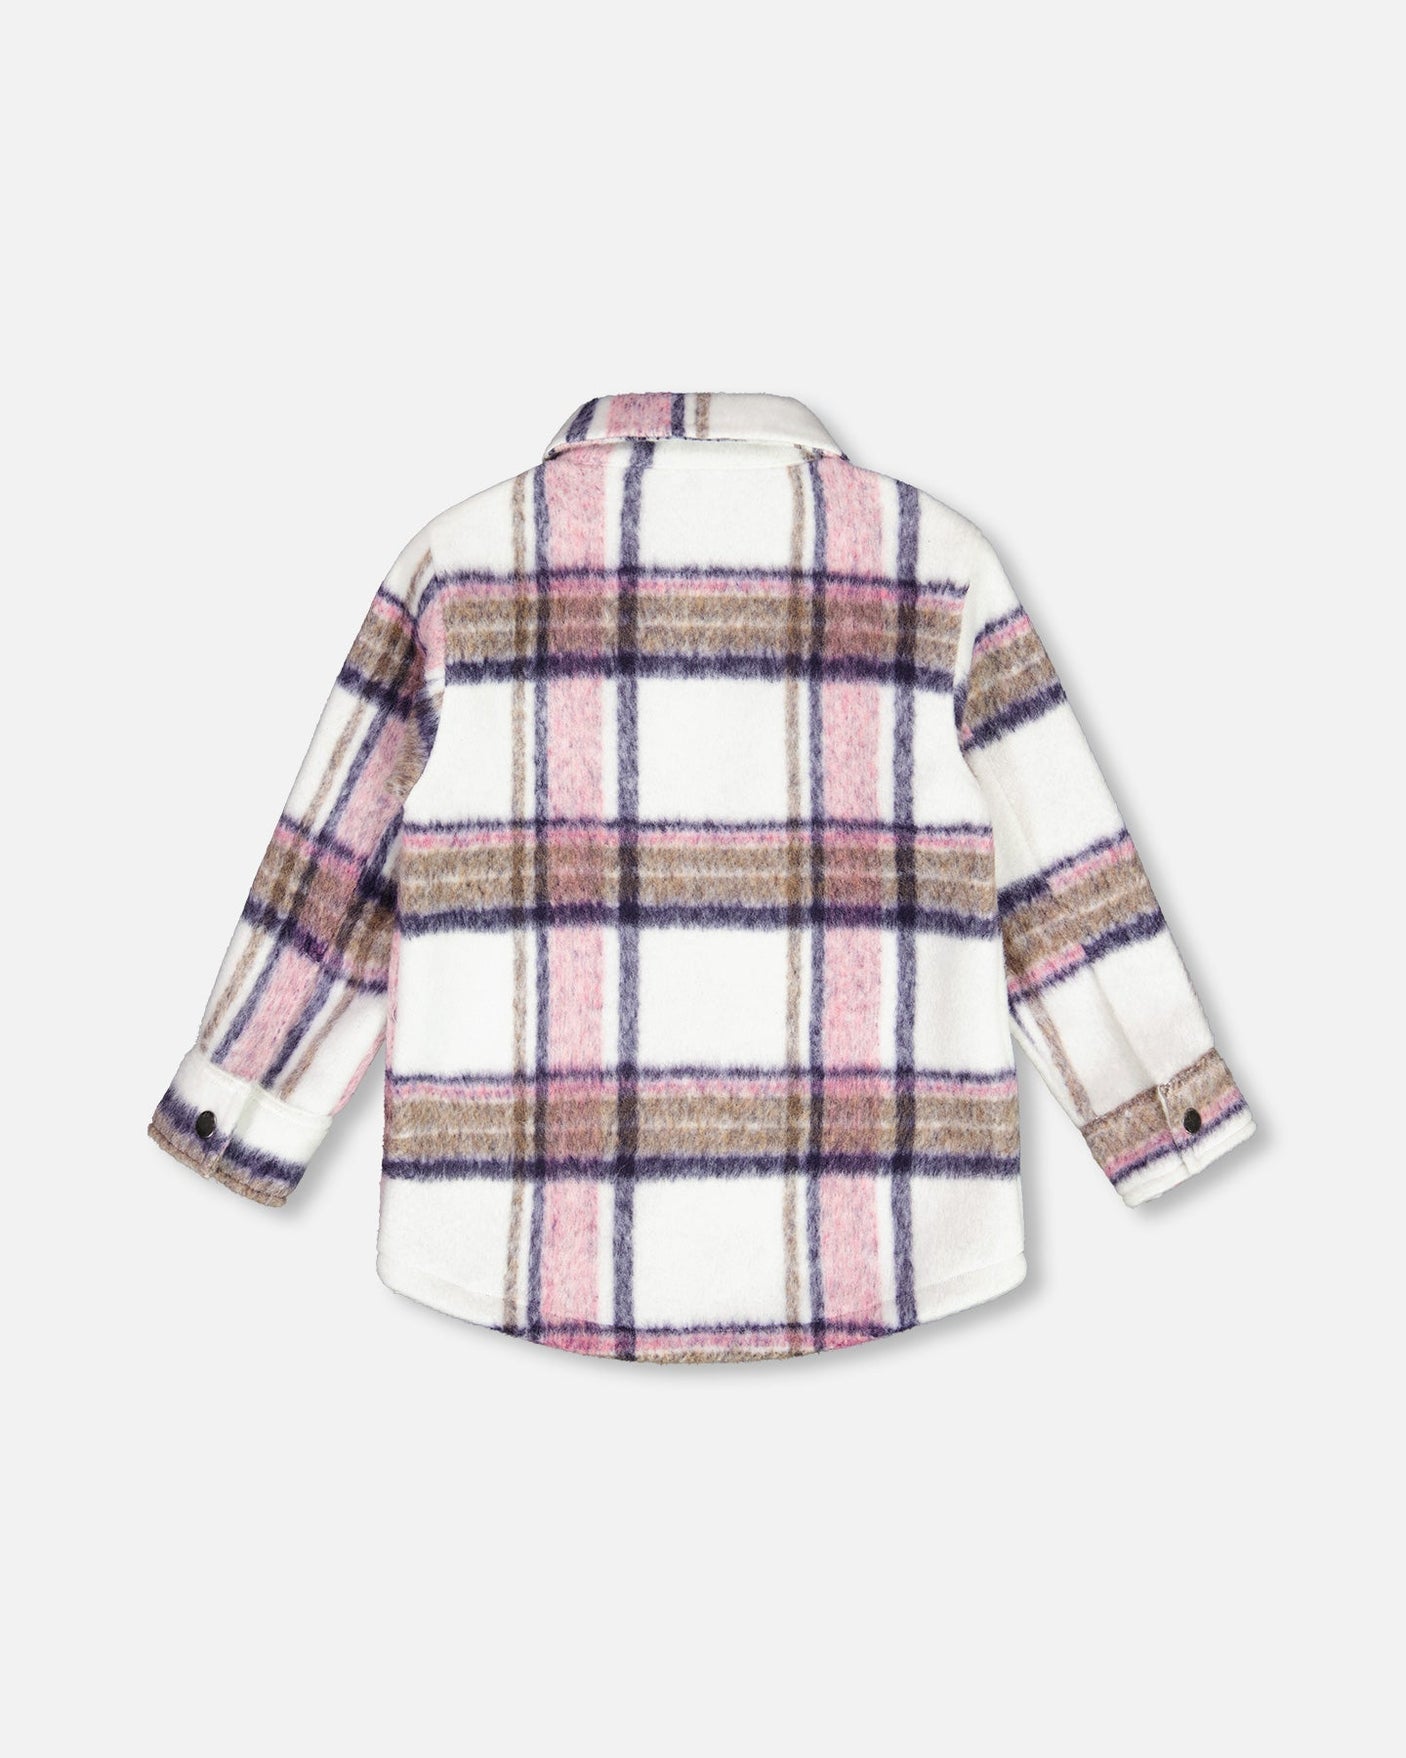 Plaid Overshirt Off White, Pink And Purple-3